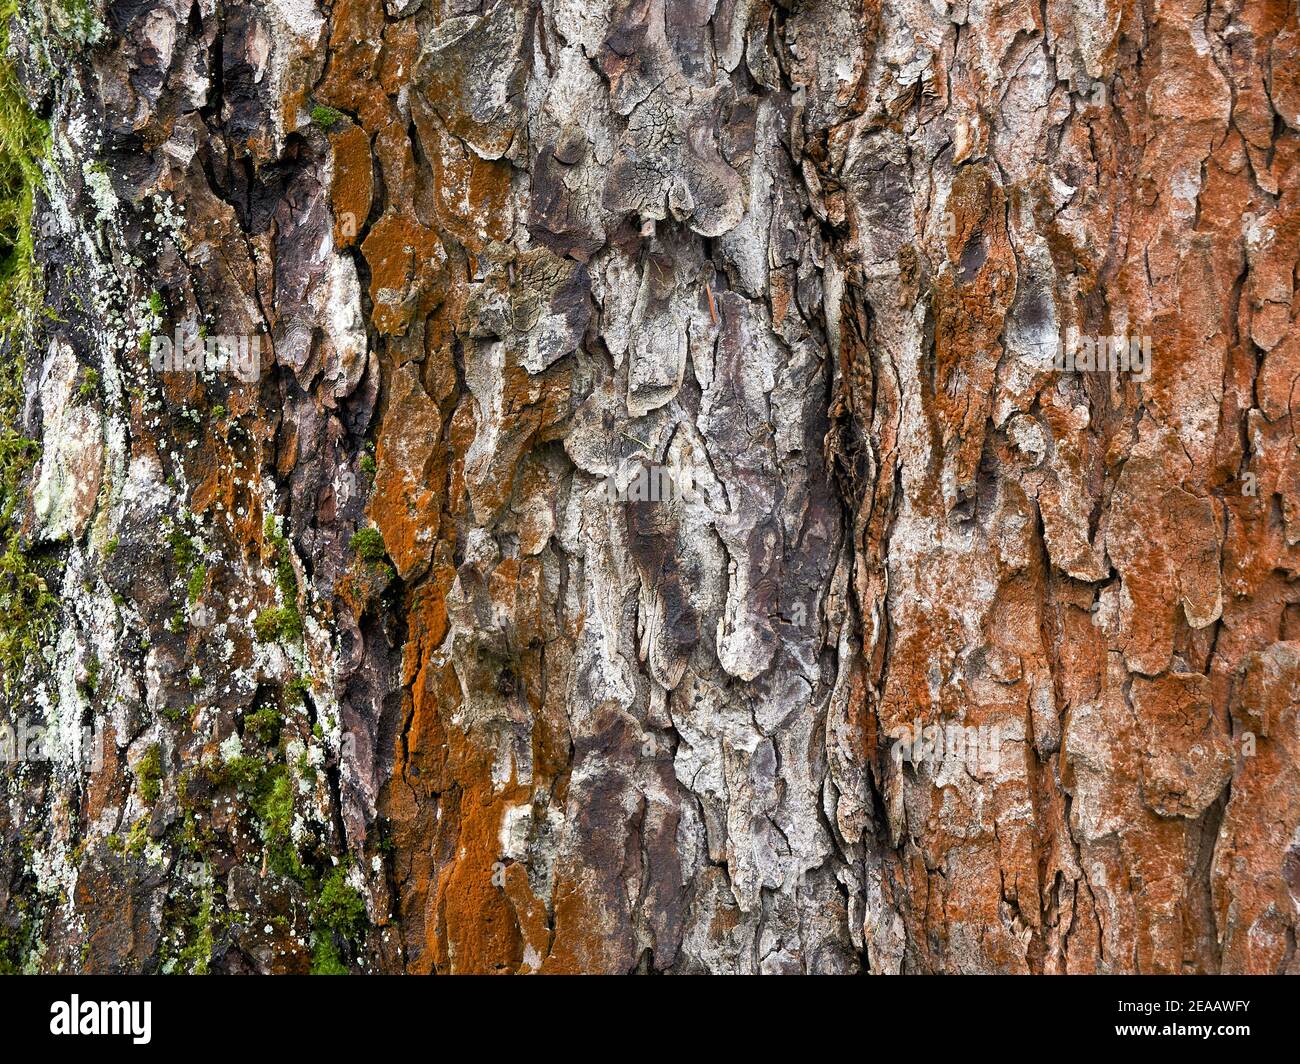 Closeup of multicolored scaly tree bark backgrond Stock Photo